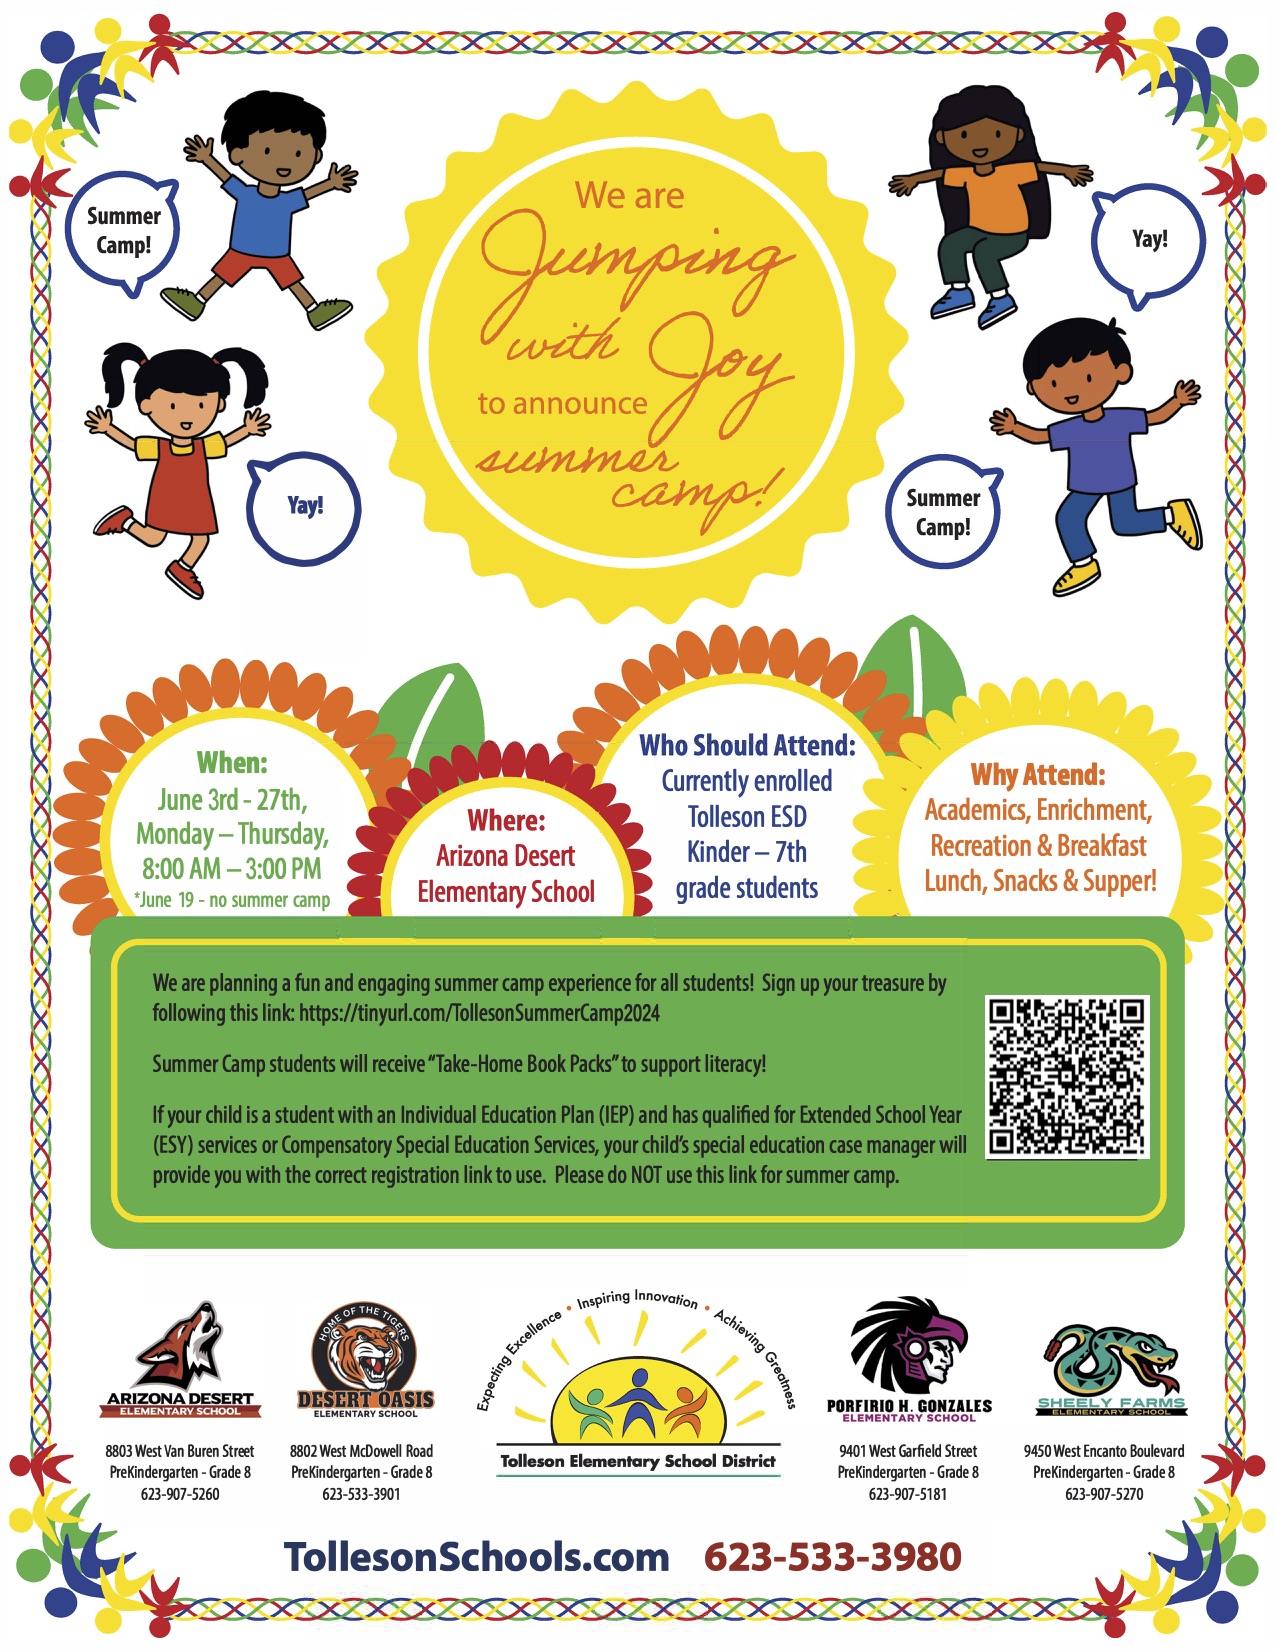 We are jumping with joy to announce summer camp flyer